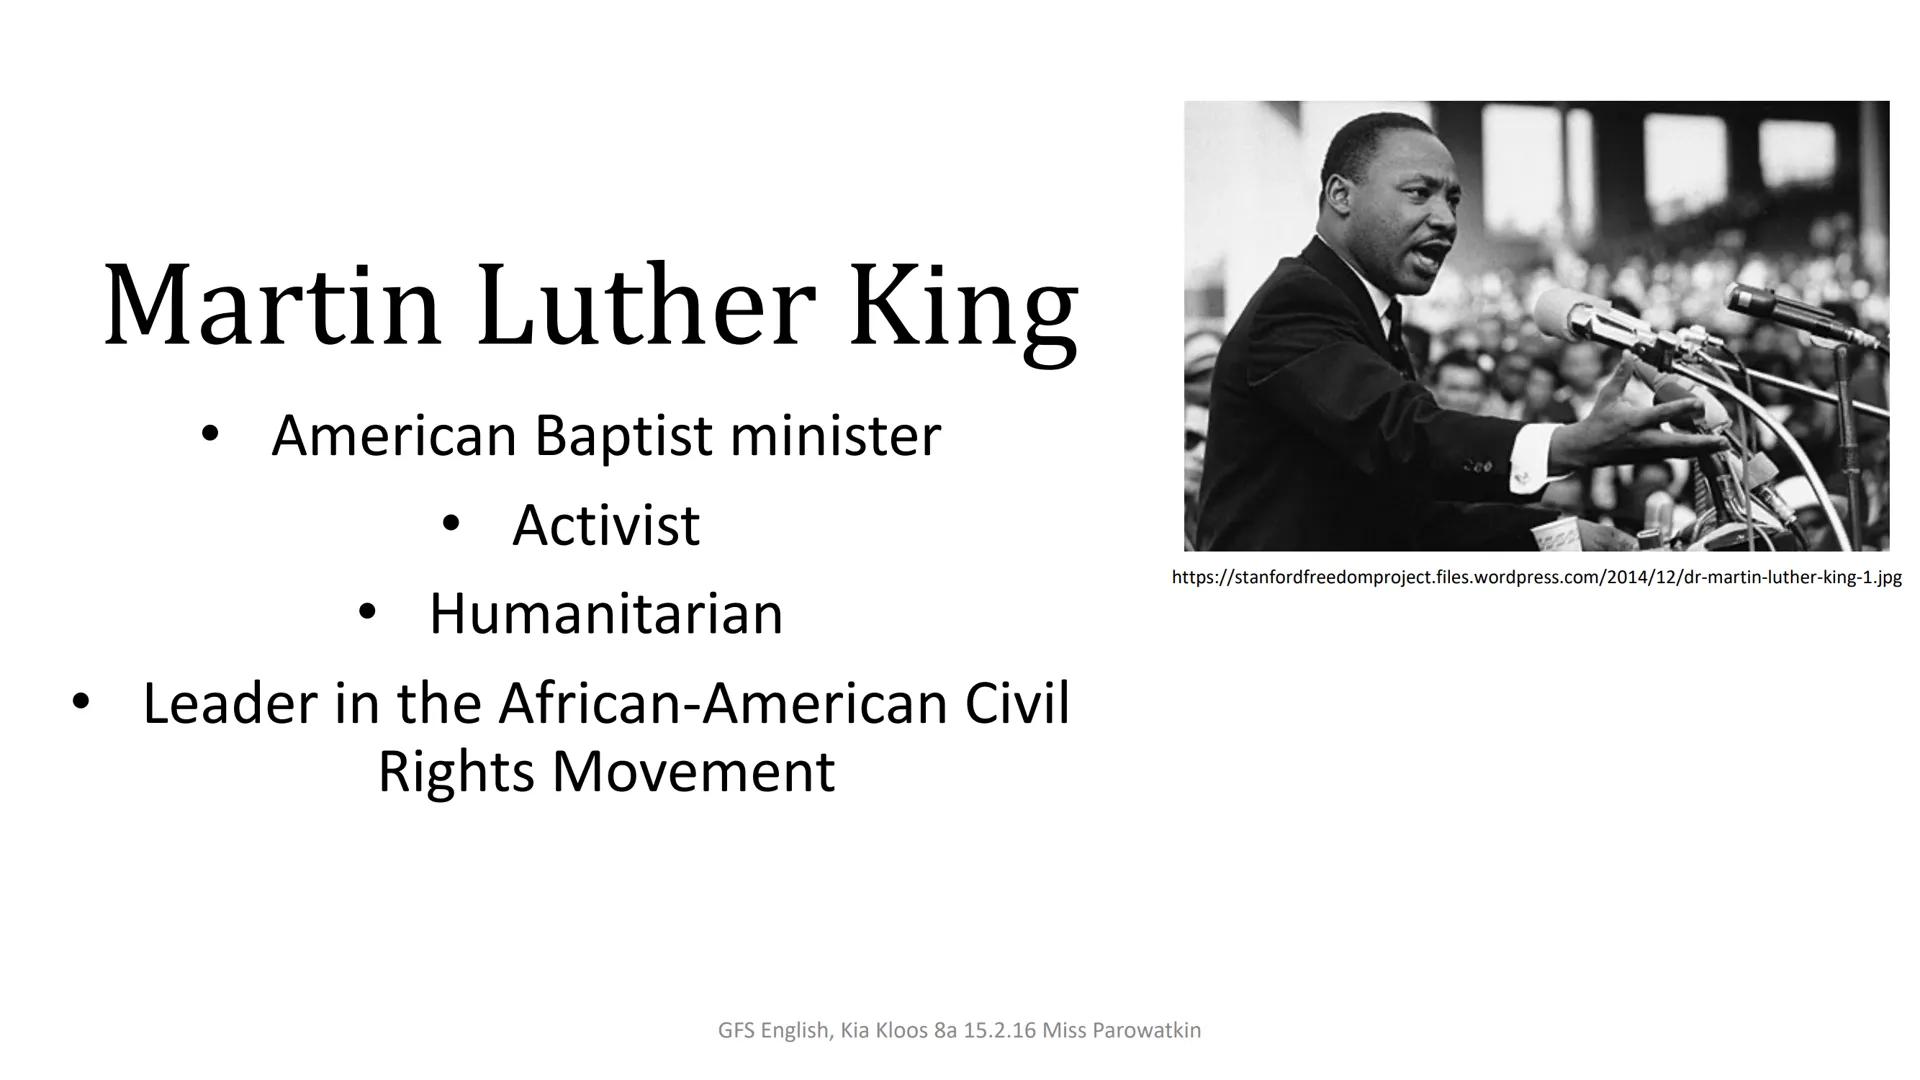 Martin Luther King
American Baptist minister
Activist
Humanitarian
●
●
Leader in the African-American Civil
Rights Movement
n
https://stanfo